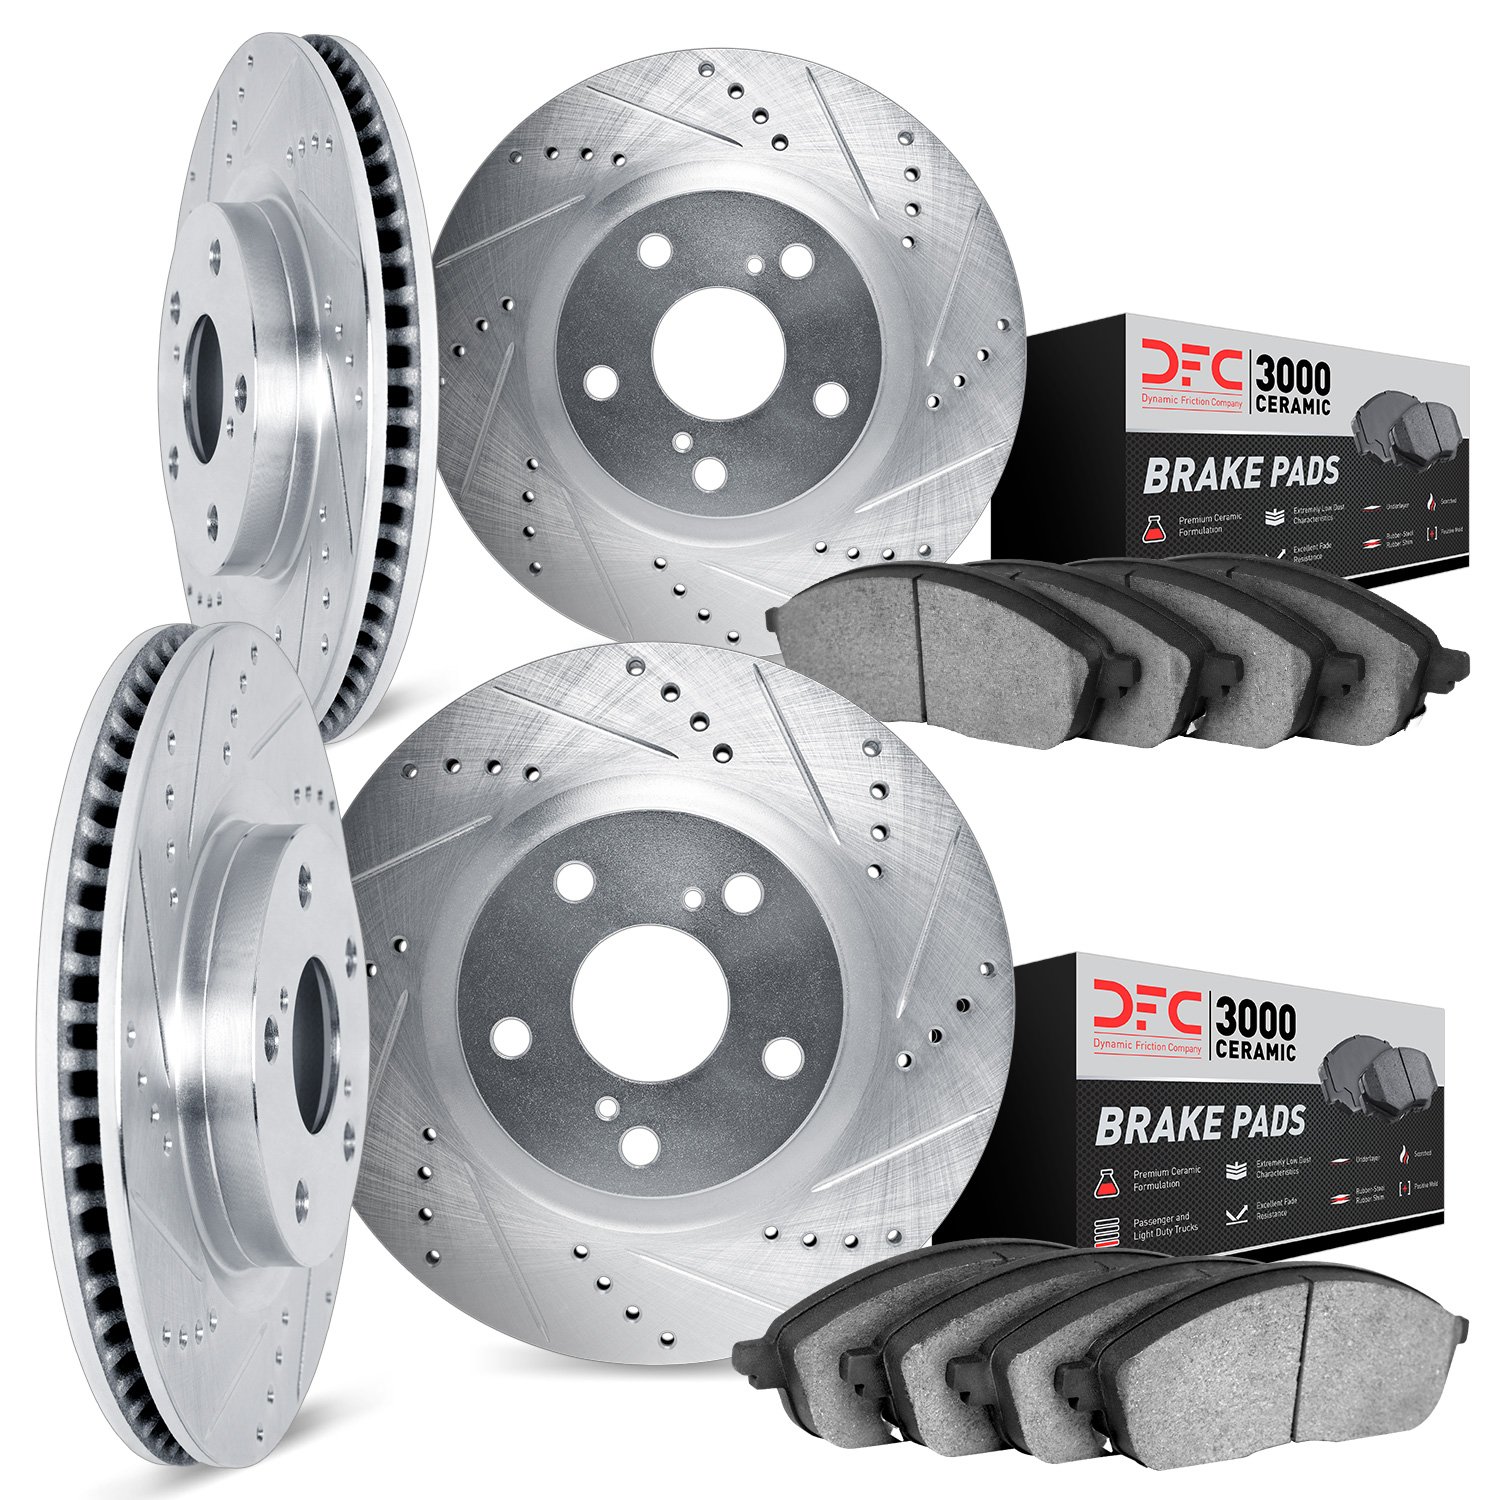 7304-80005 Drilled/Slotted Brake Rotor with 3000-Series Ceramic Brake Pads Kit [Silver], 1993-1995 Ford/Lincoln/Mercury/Mazda, P